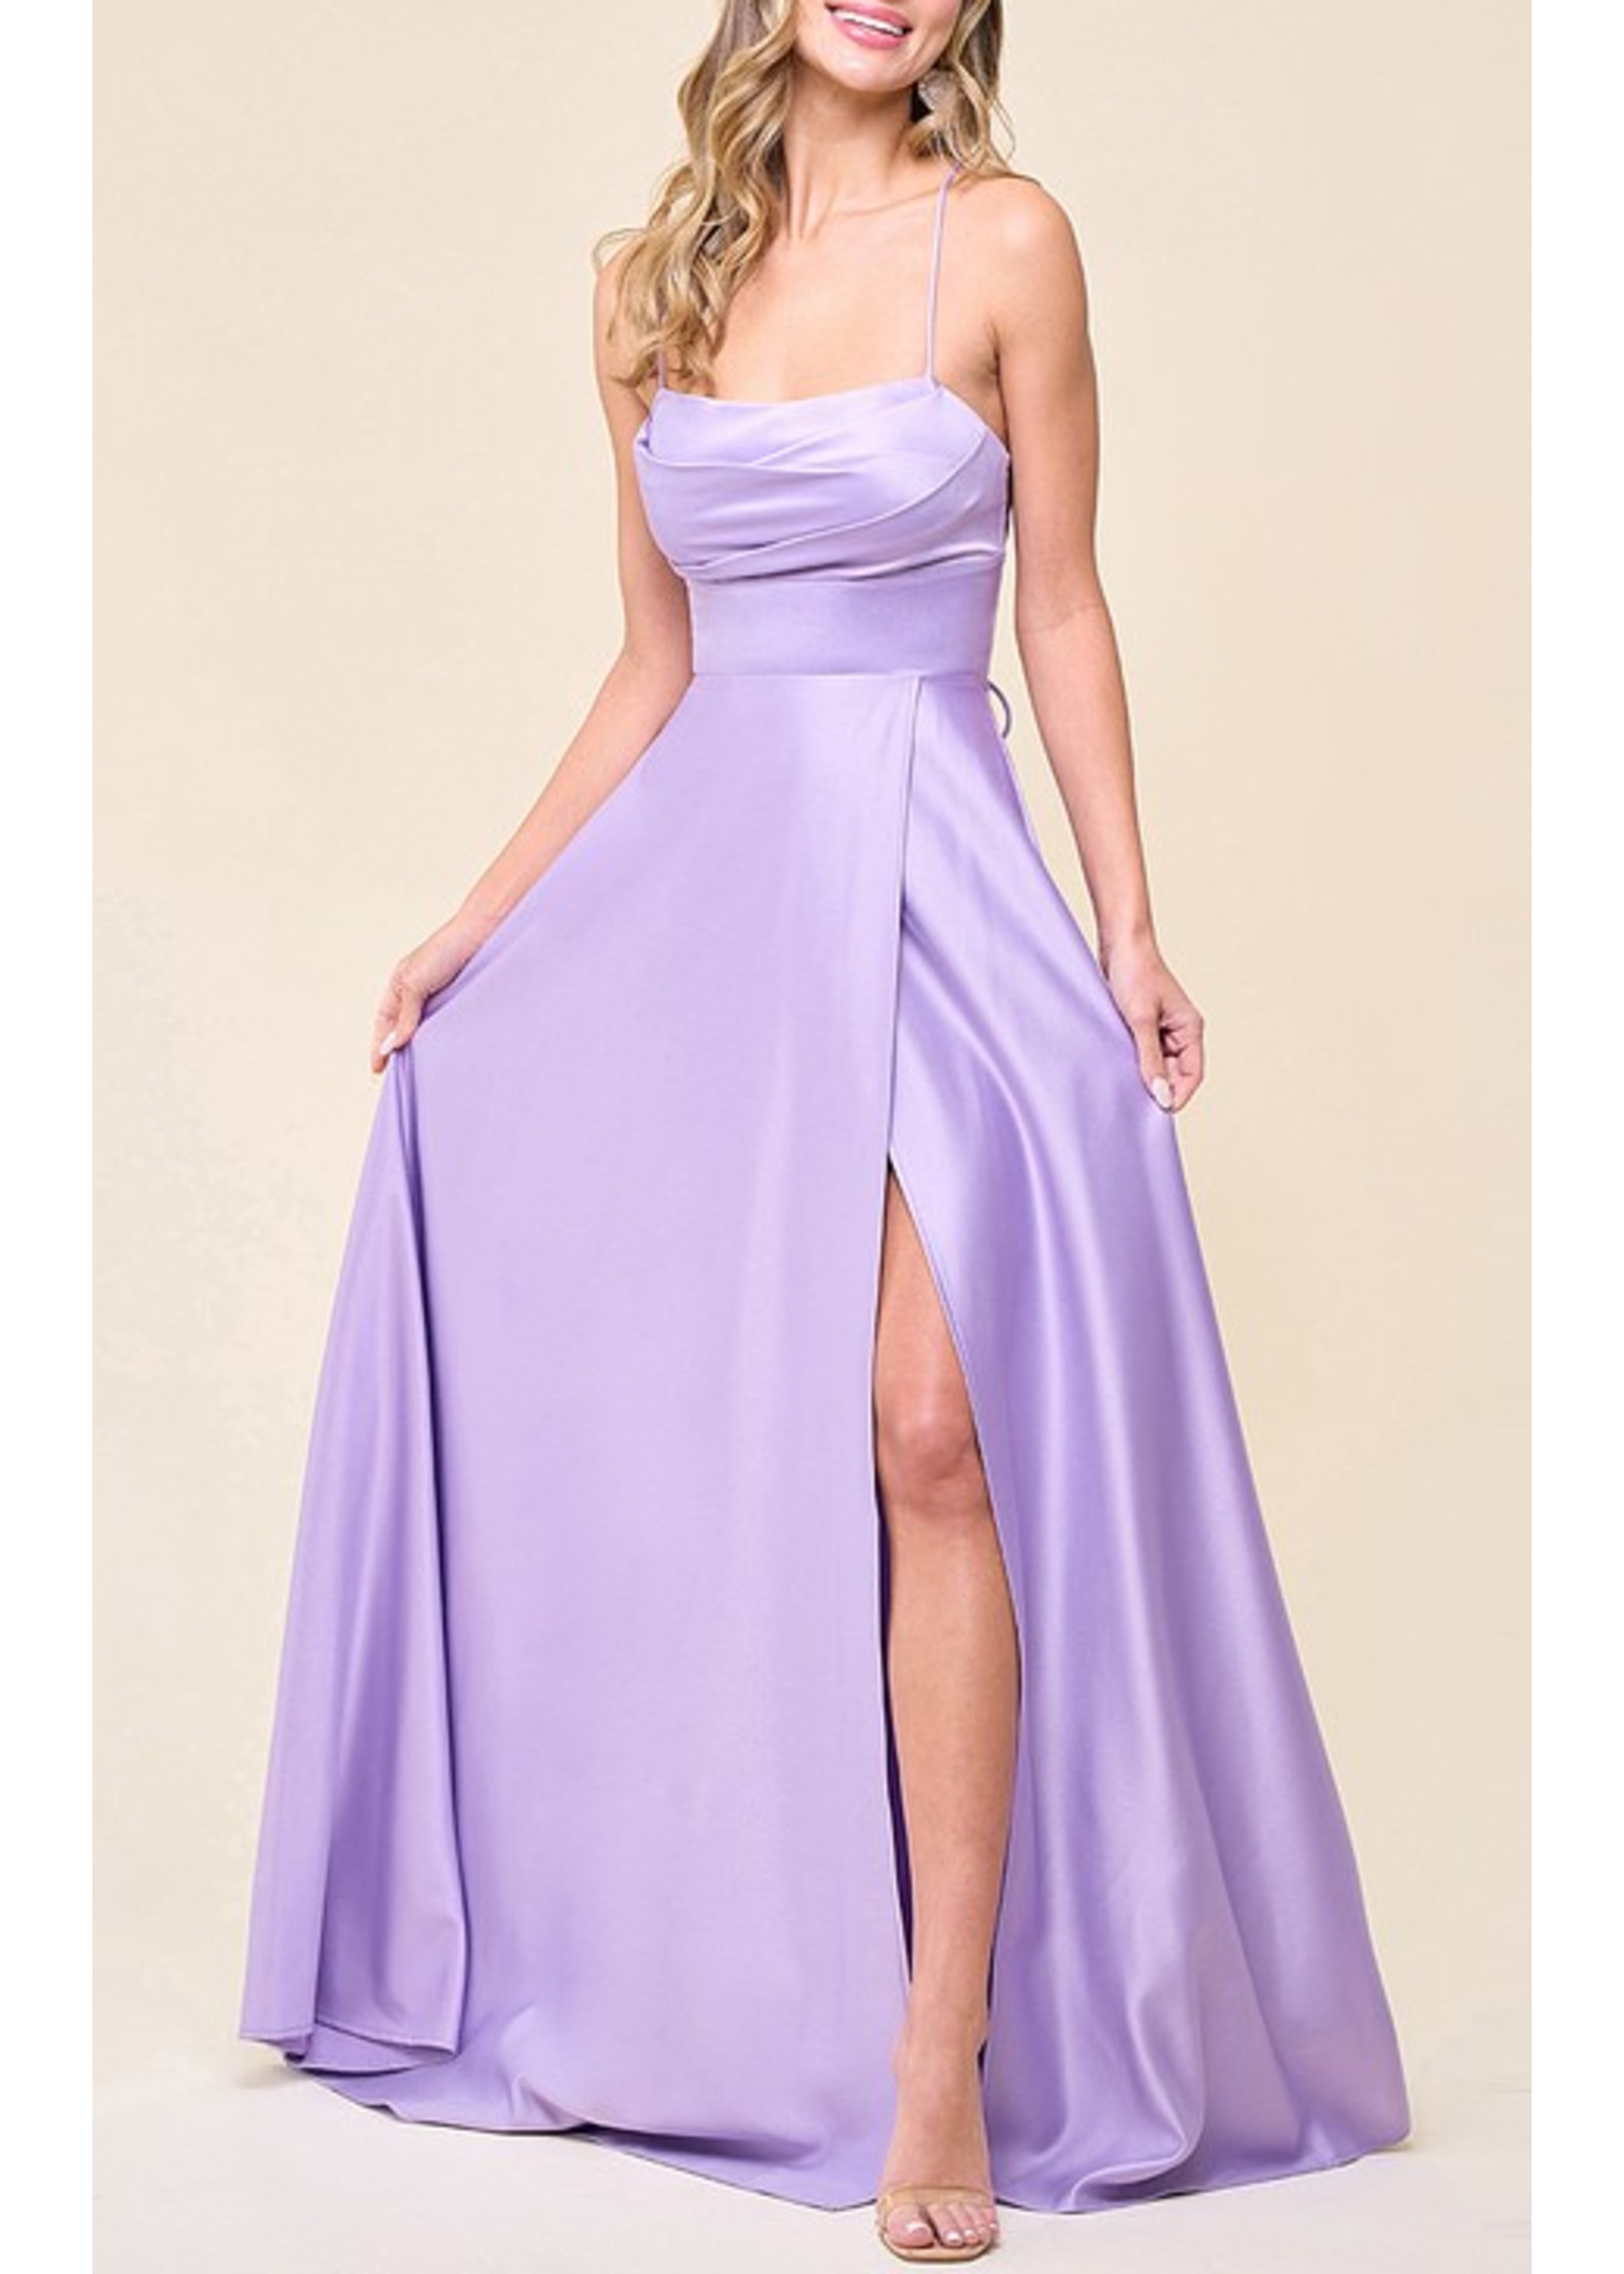 MUMF21718 - EVENING GOWN W THIN SPAGHETTI STRAP, HIGH SLIT WITH CUT OUT CORSET BACK